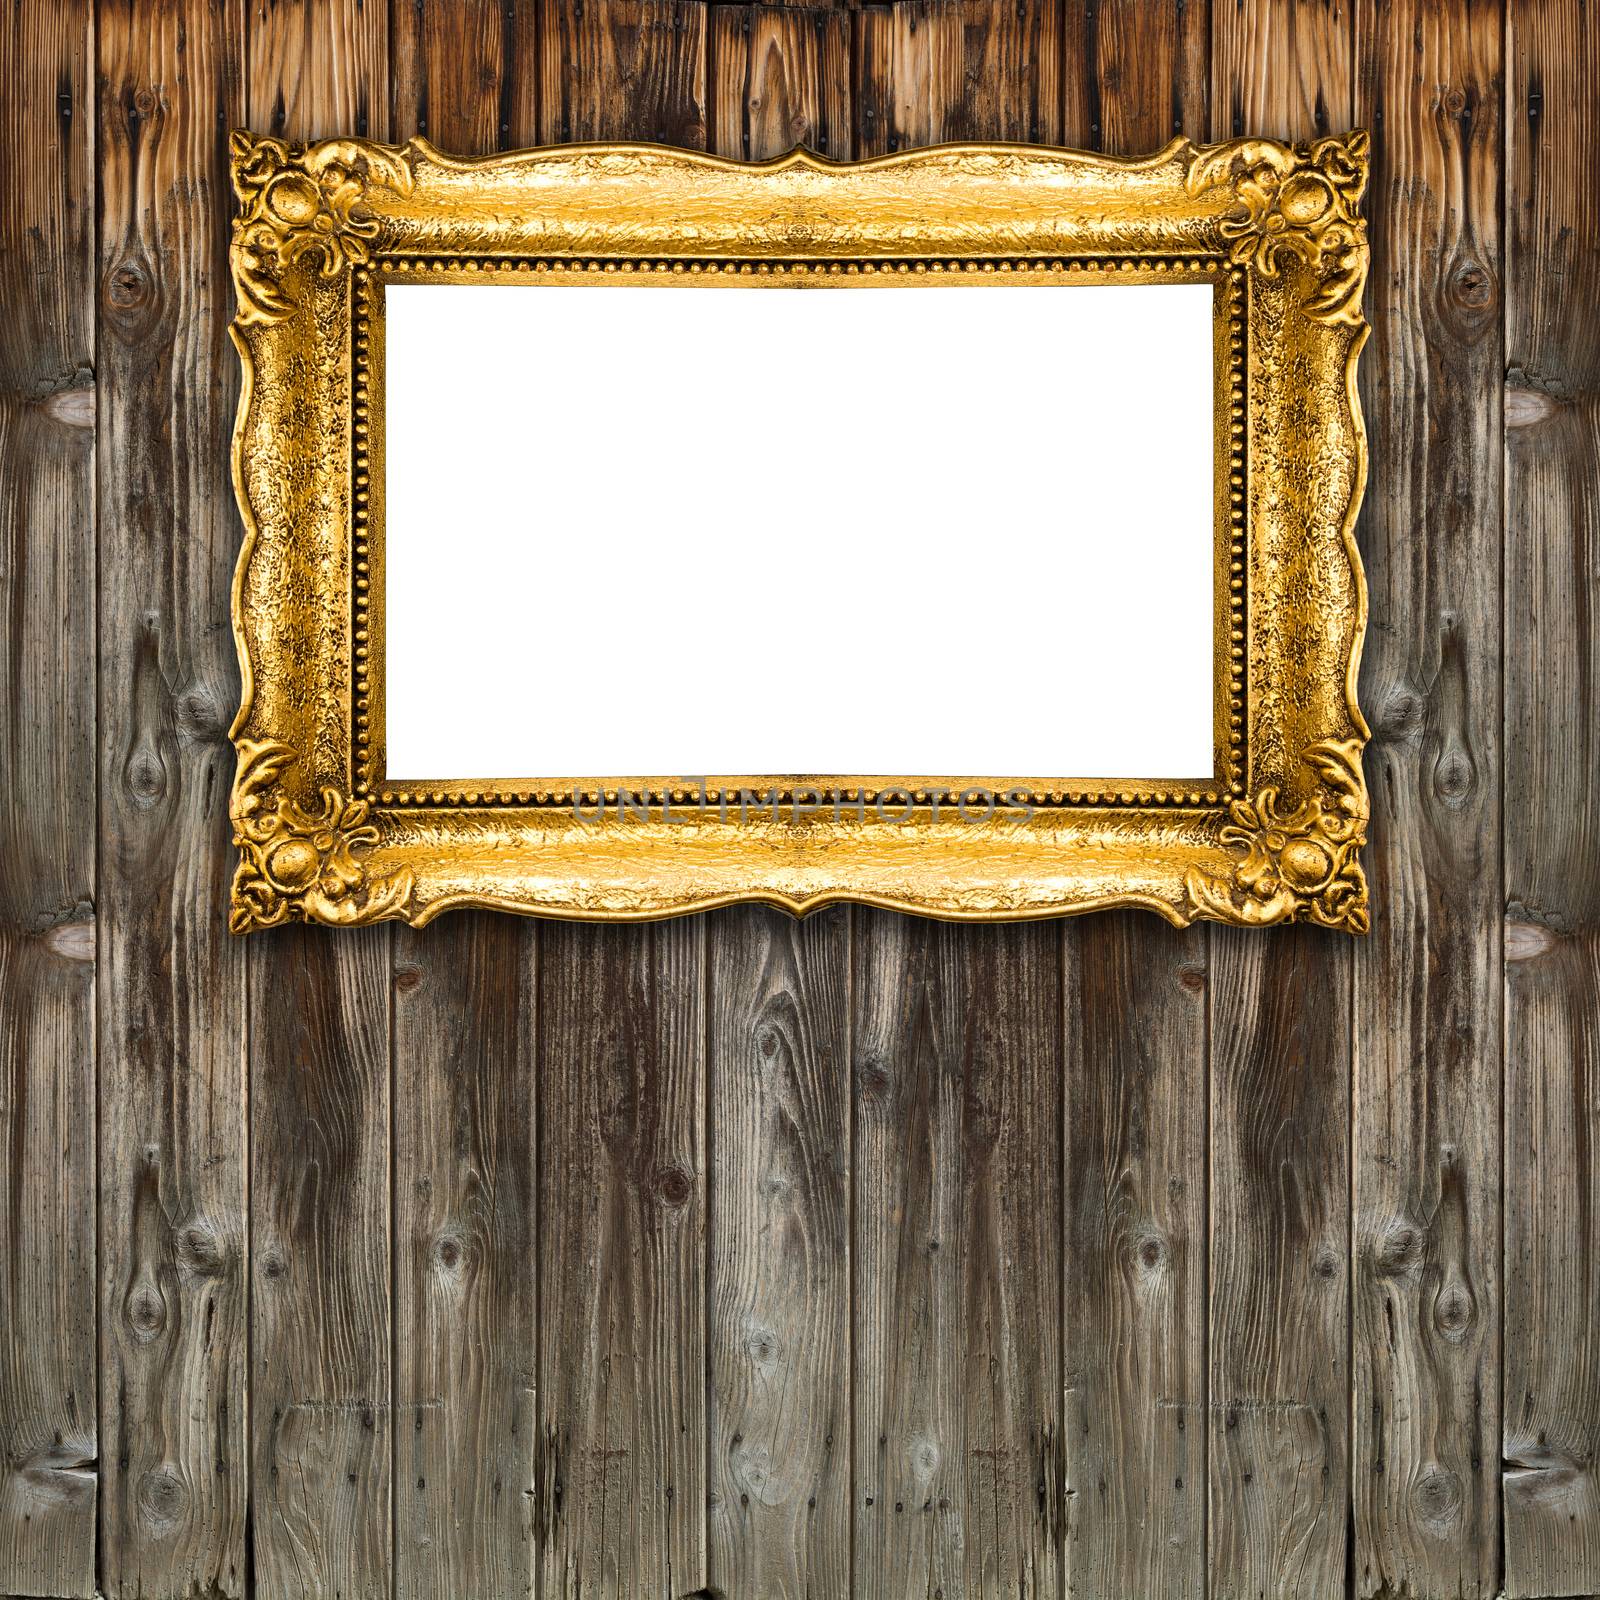 Gold Picture Frame on wood background, white inside mock up by adamr